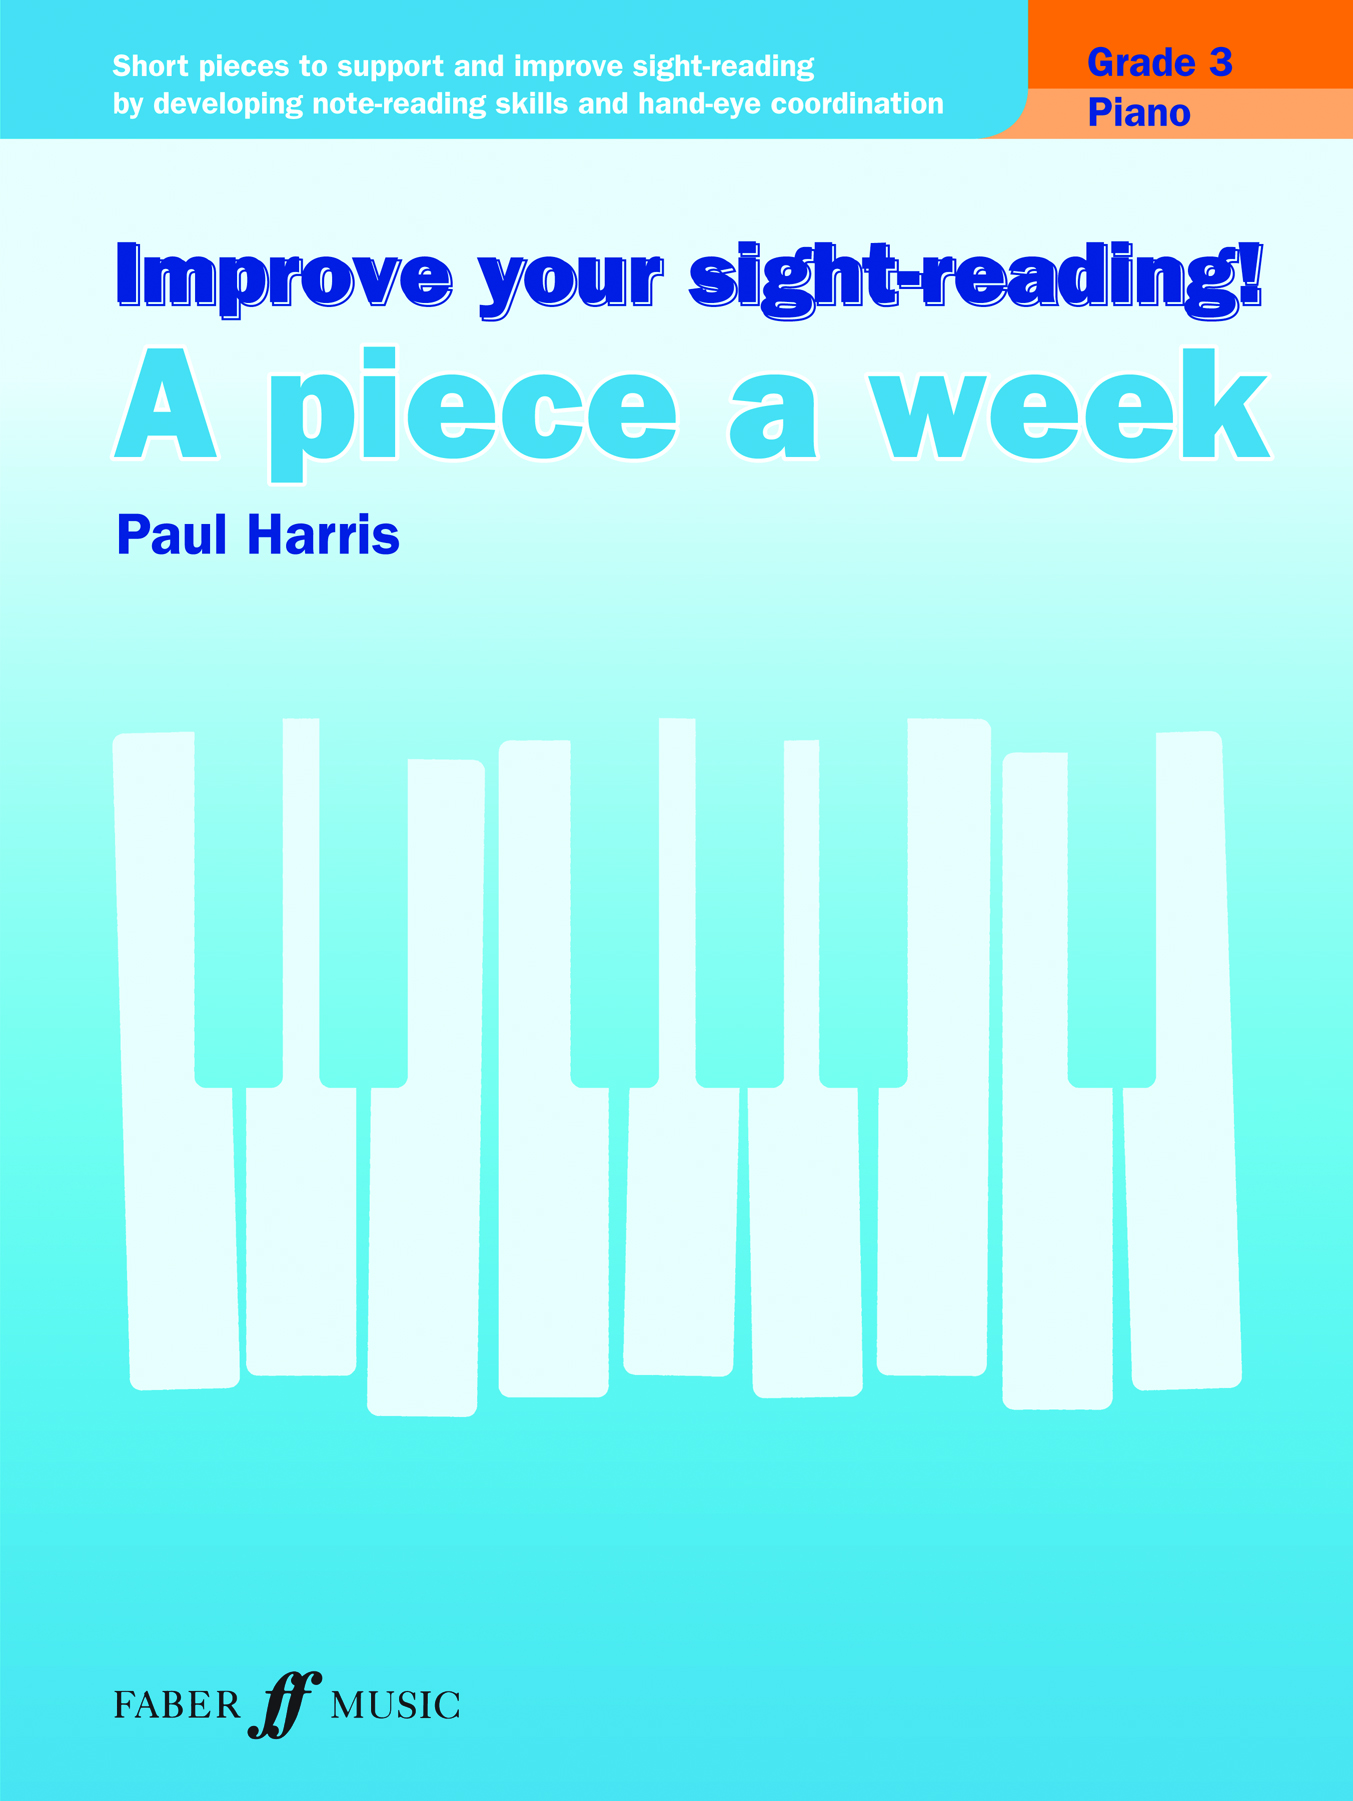 Paul Harris: Improve your sight-reading! A Piece a Week Grade 3: Piano: